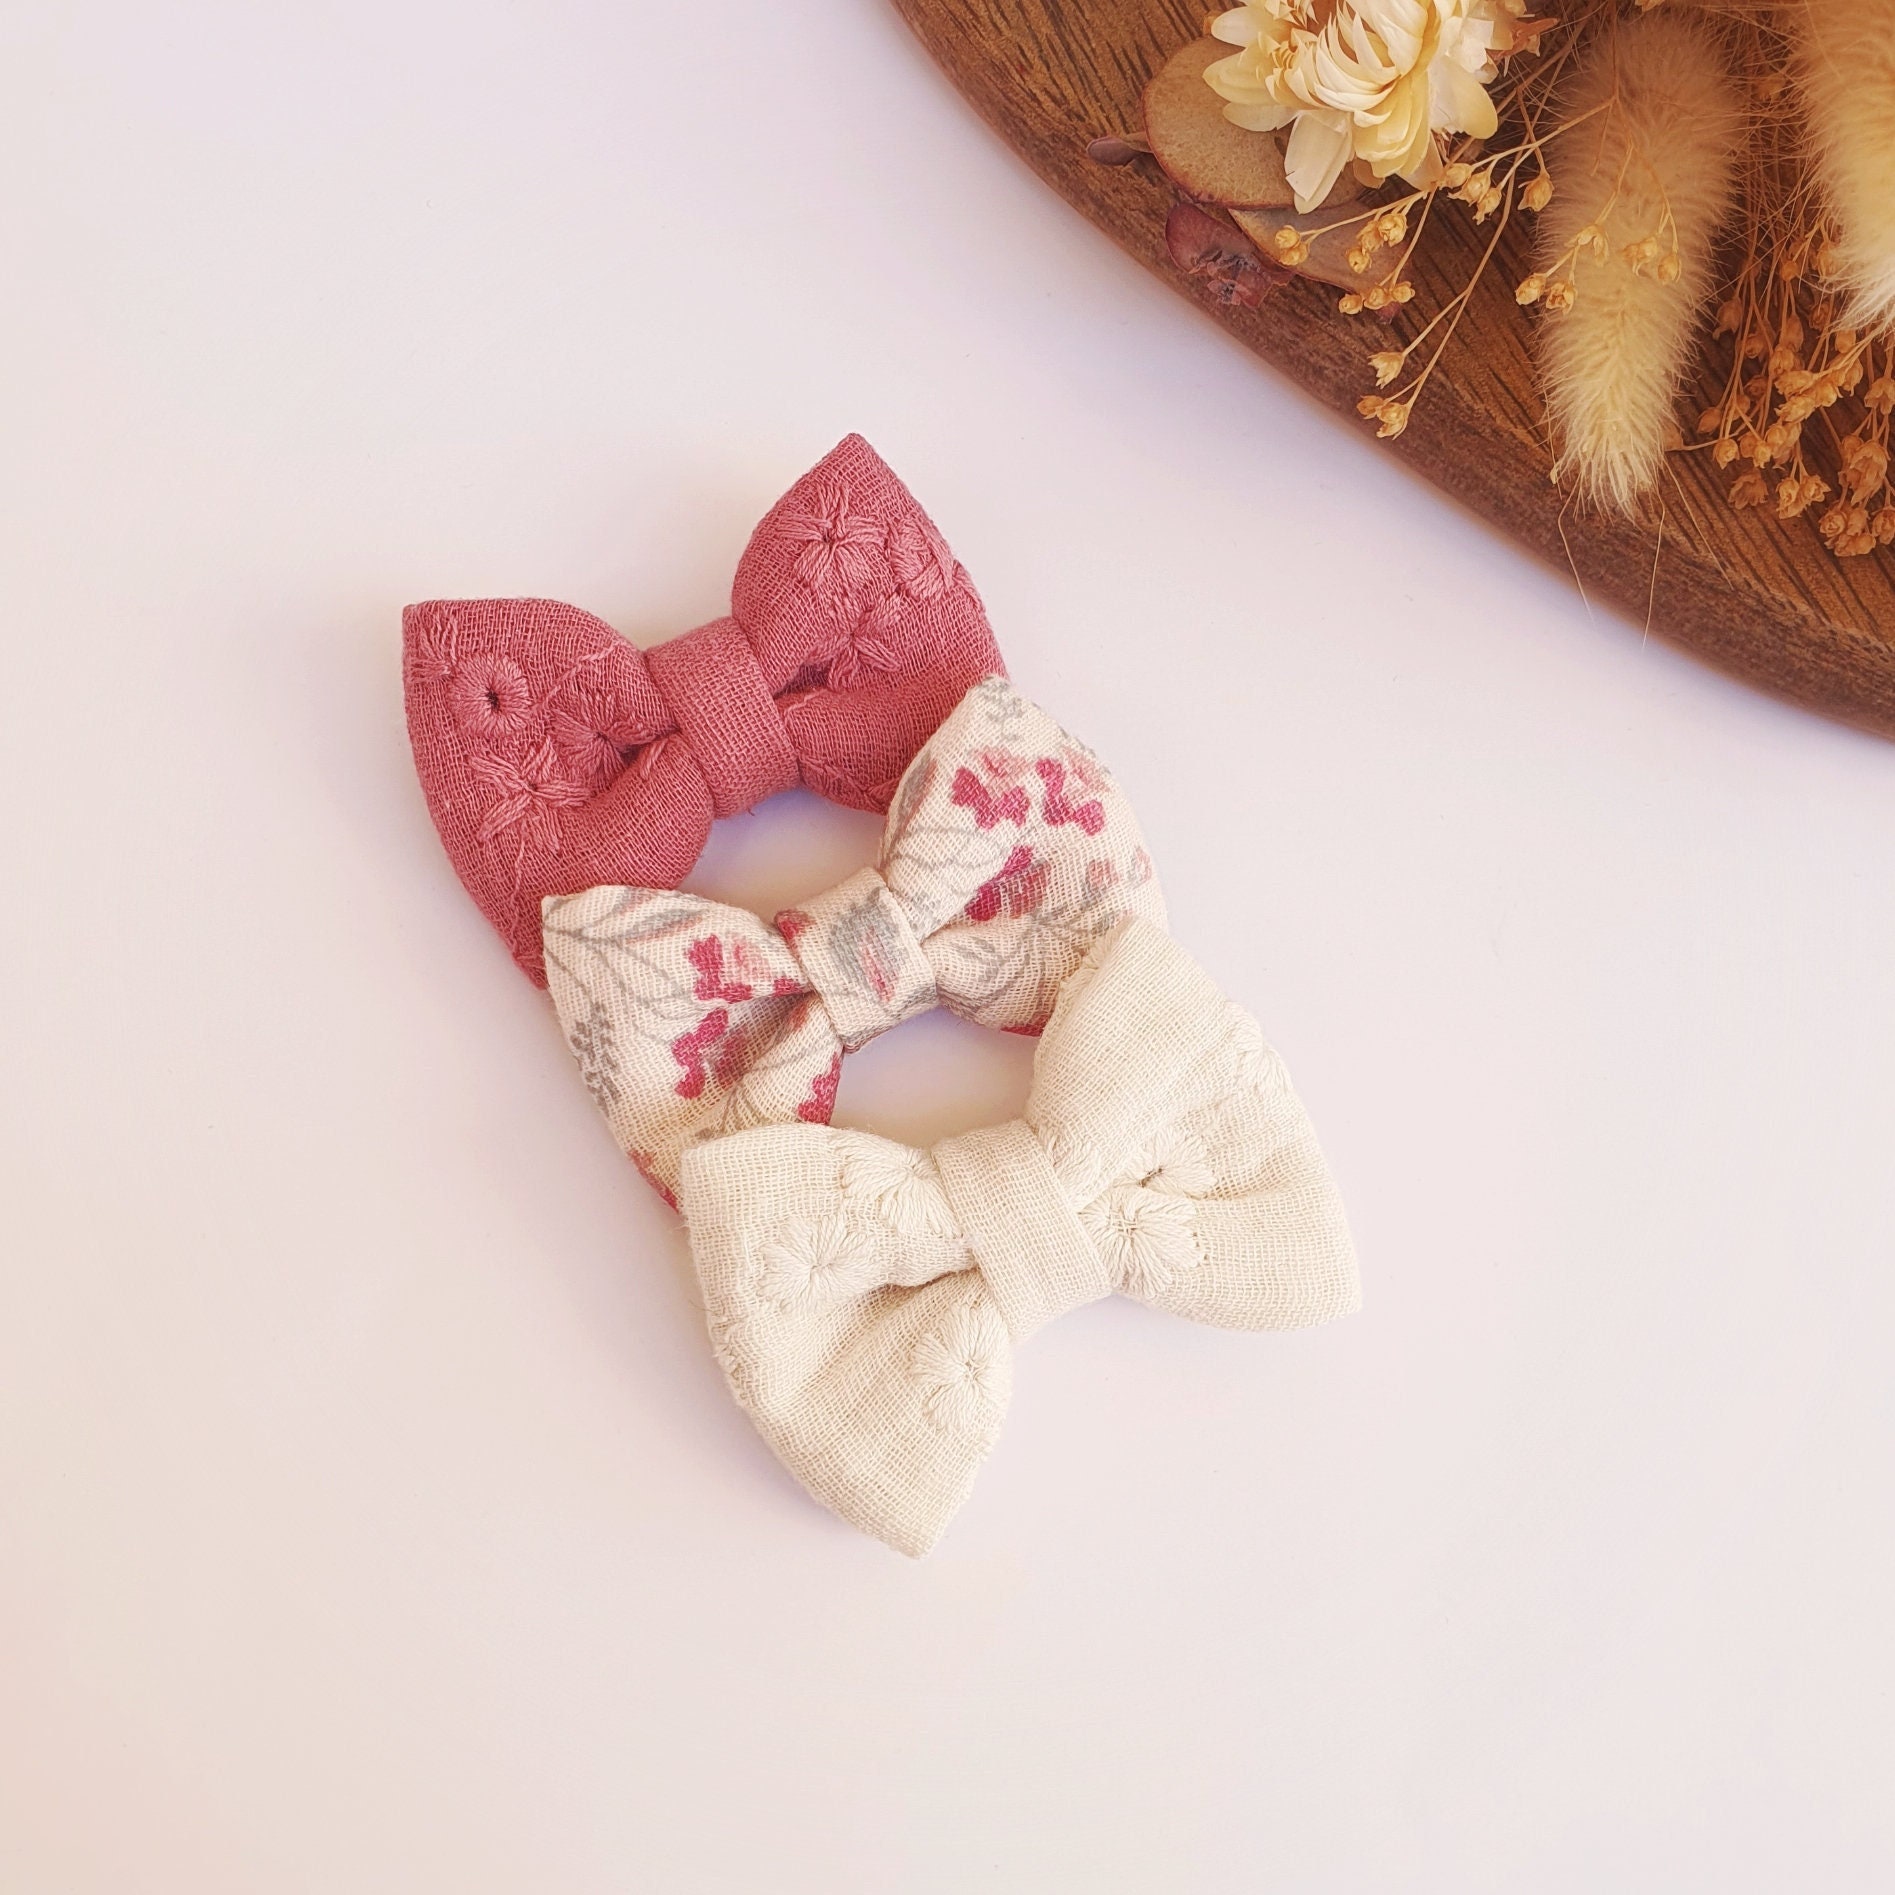 Can Older Women Wear Hairbows? - Decor To Adore